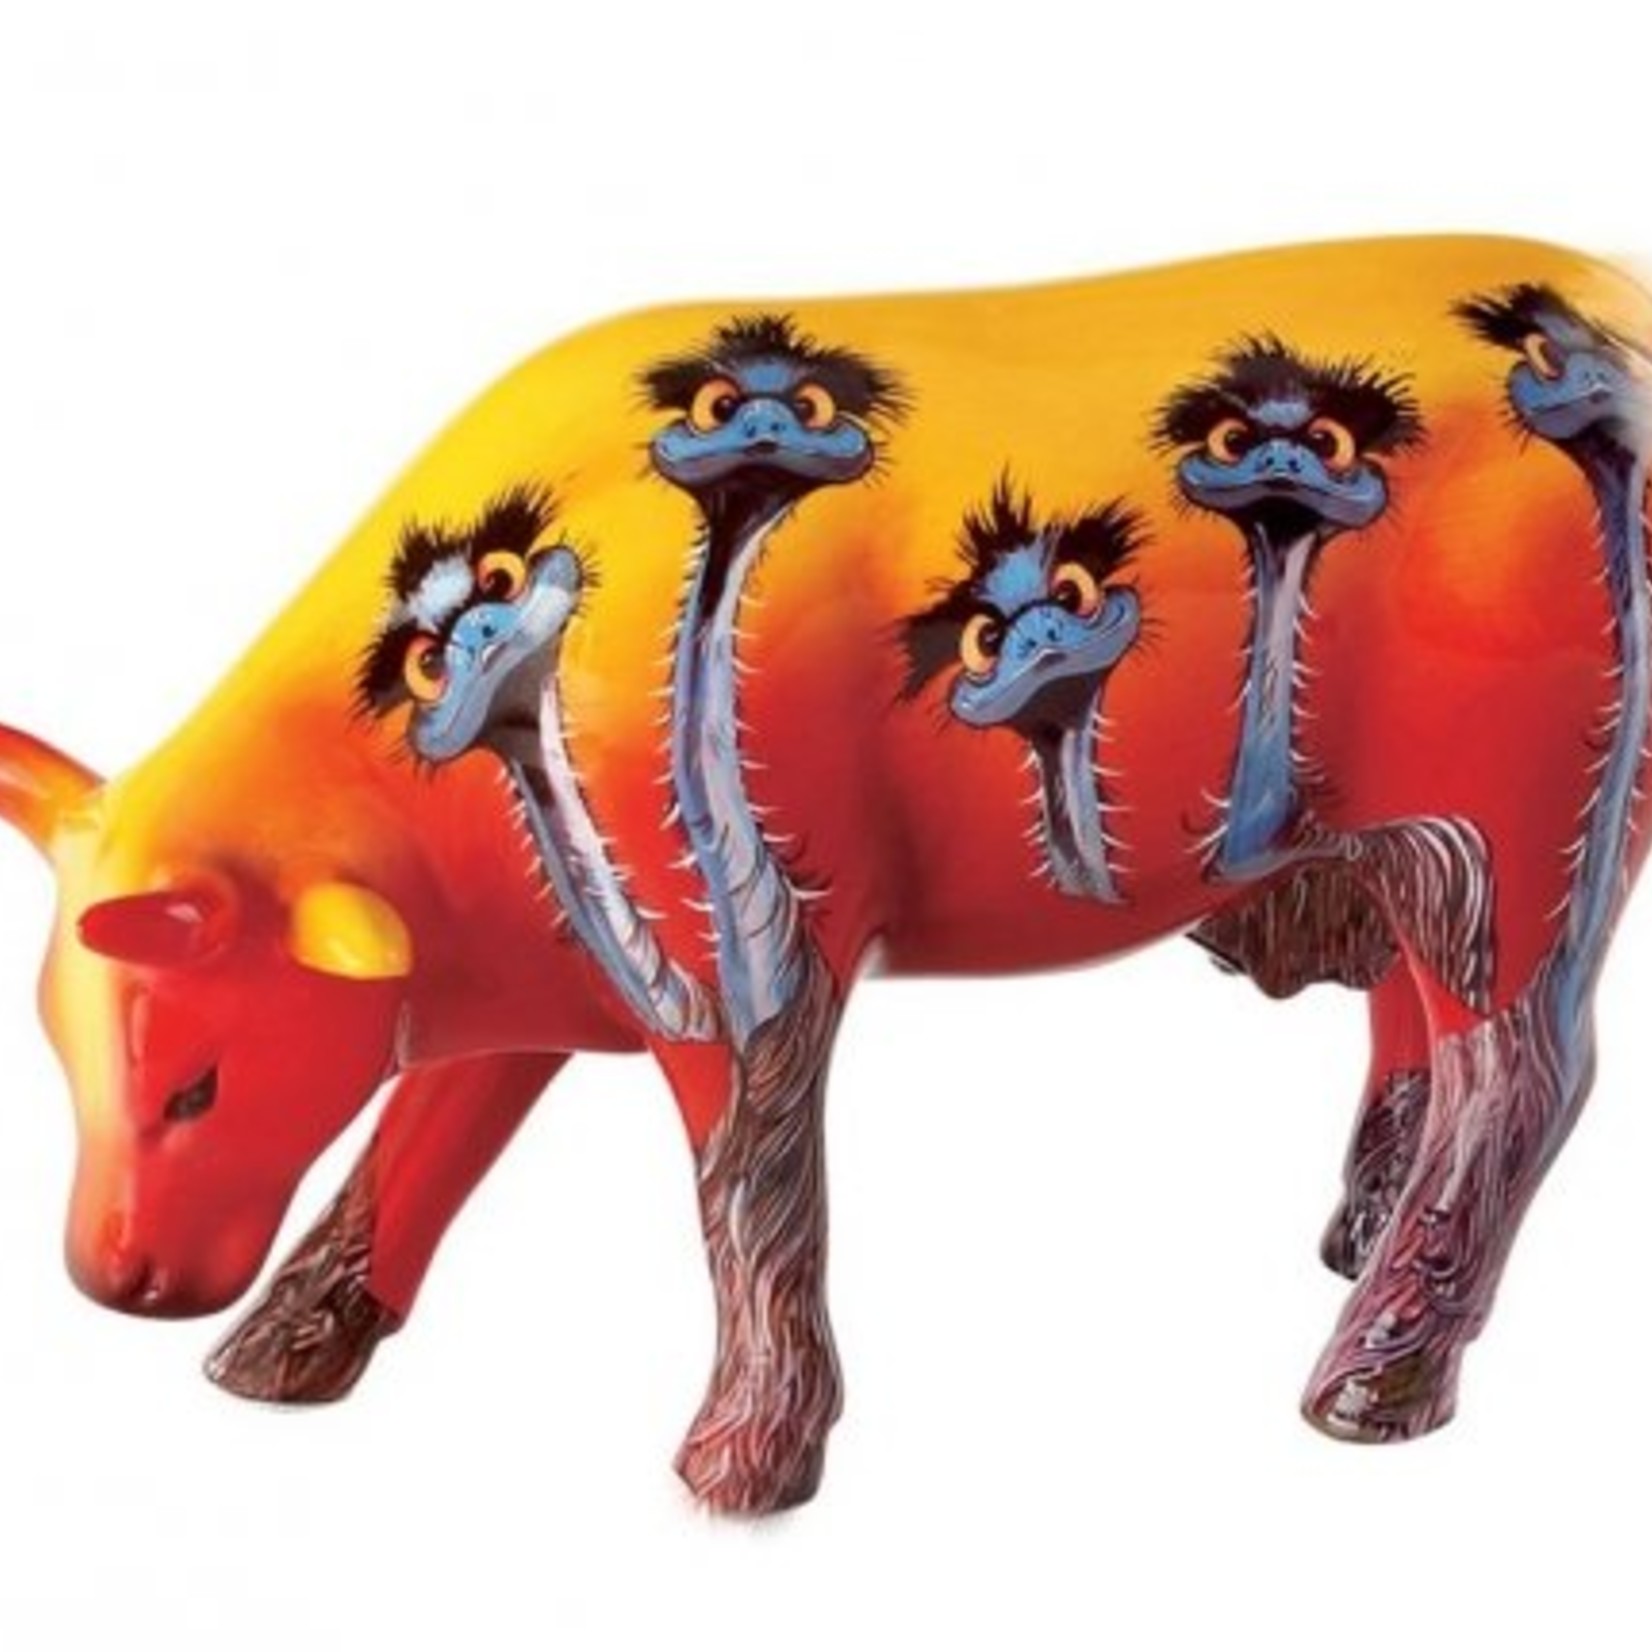 Cowparade by Wendy Binks Margret River 2010